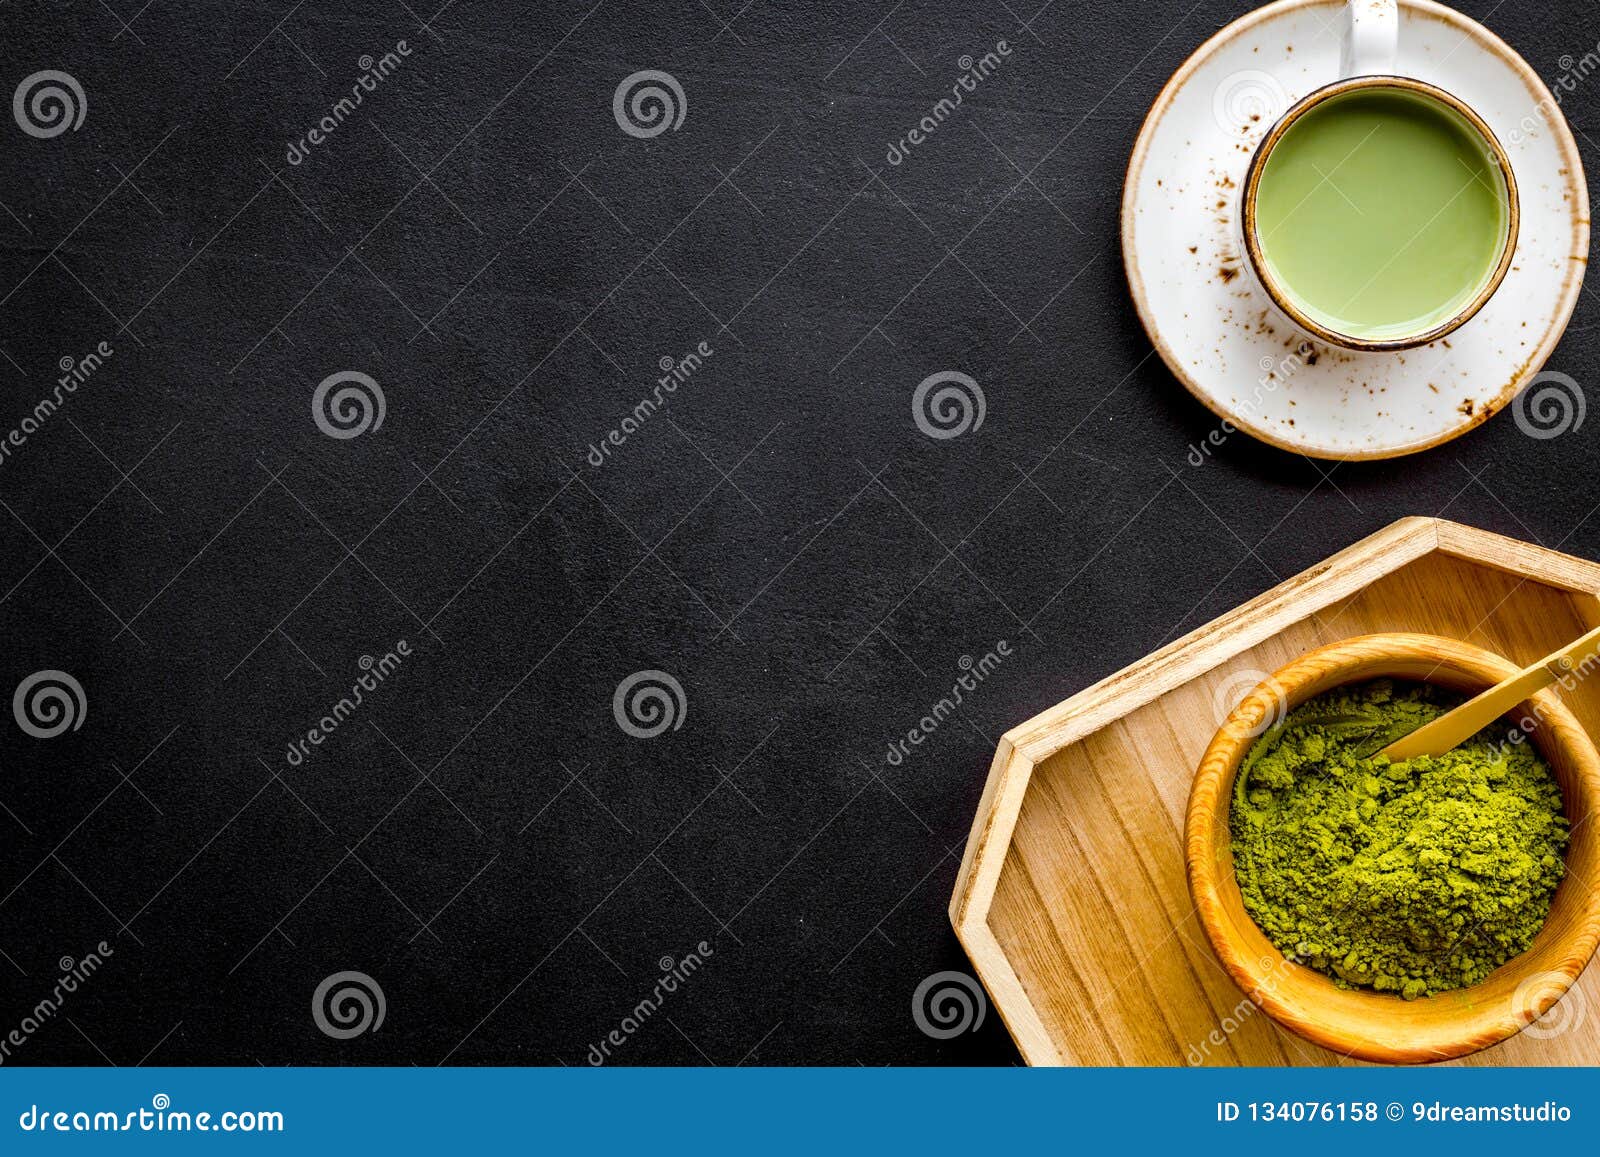 Coffee And Cocktails With Matcha Concept. Matcha Latte Near Bowl With Matcha Powder And ...